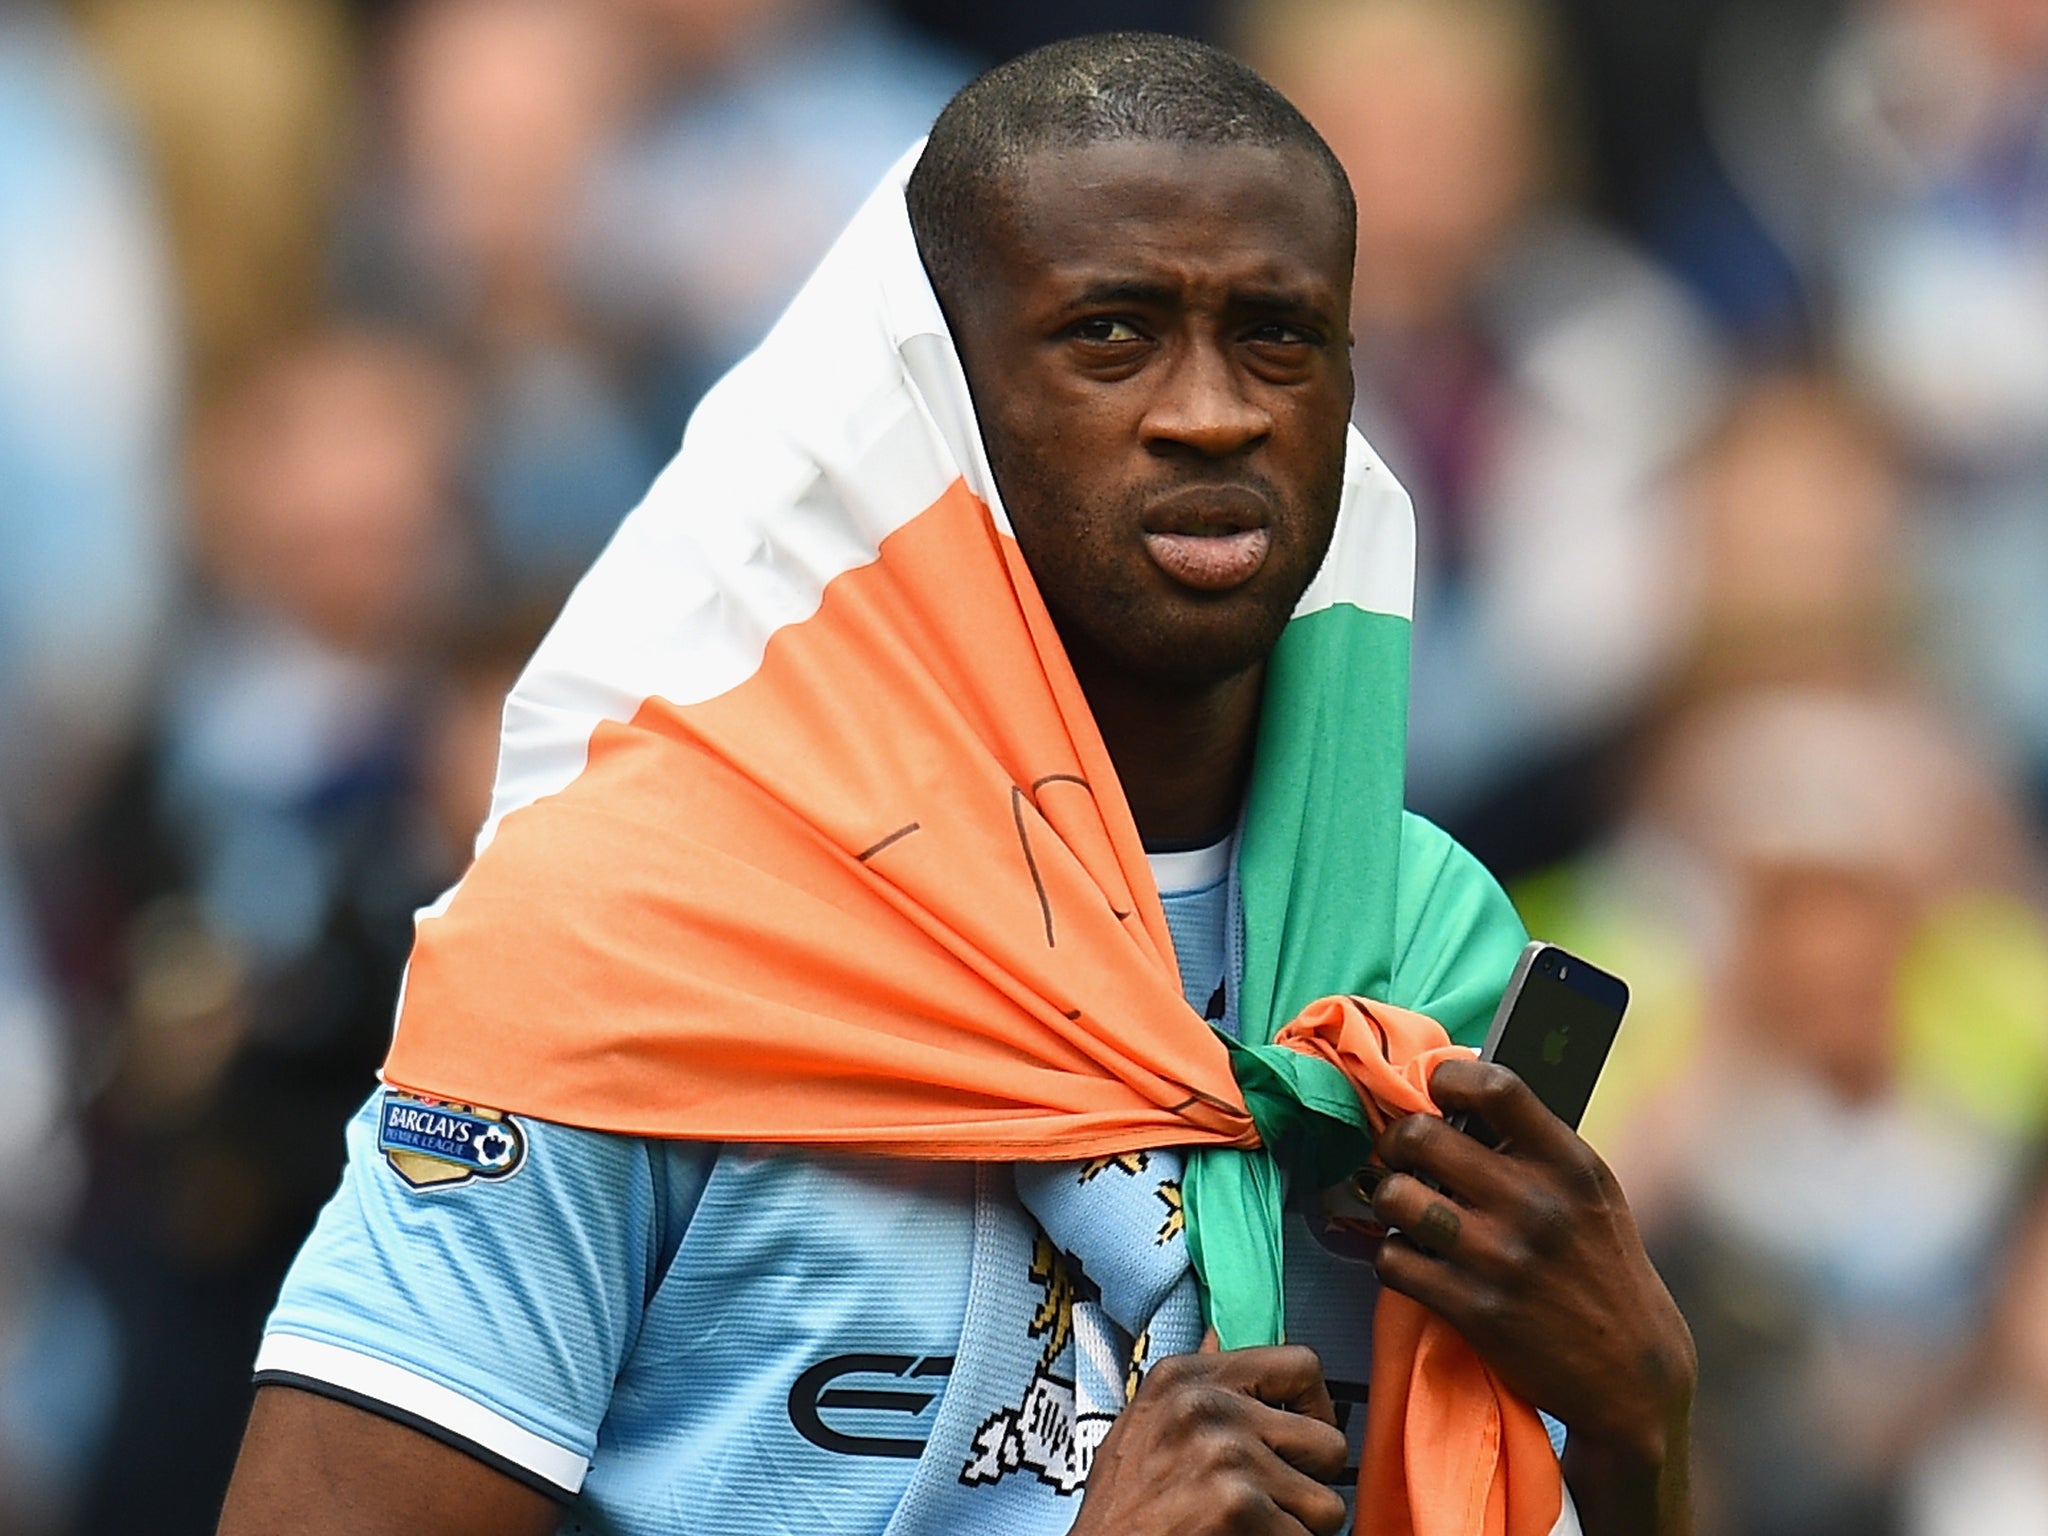 Yaya Toure could leave Manchester City in the summer, claims his agent